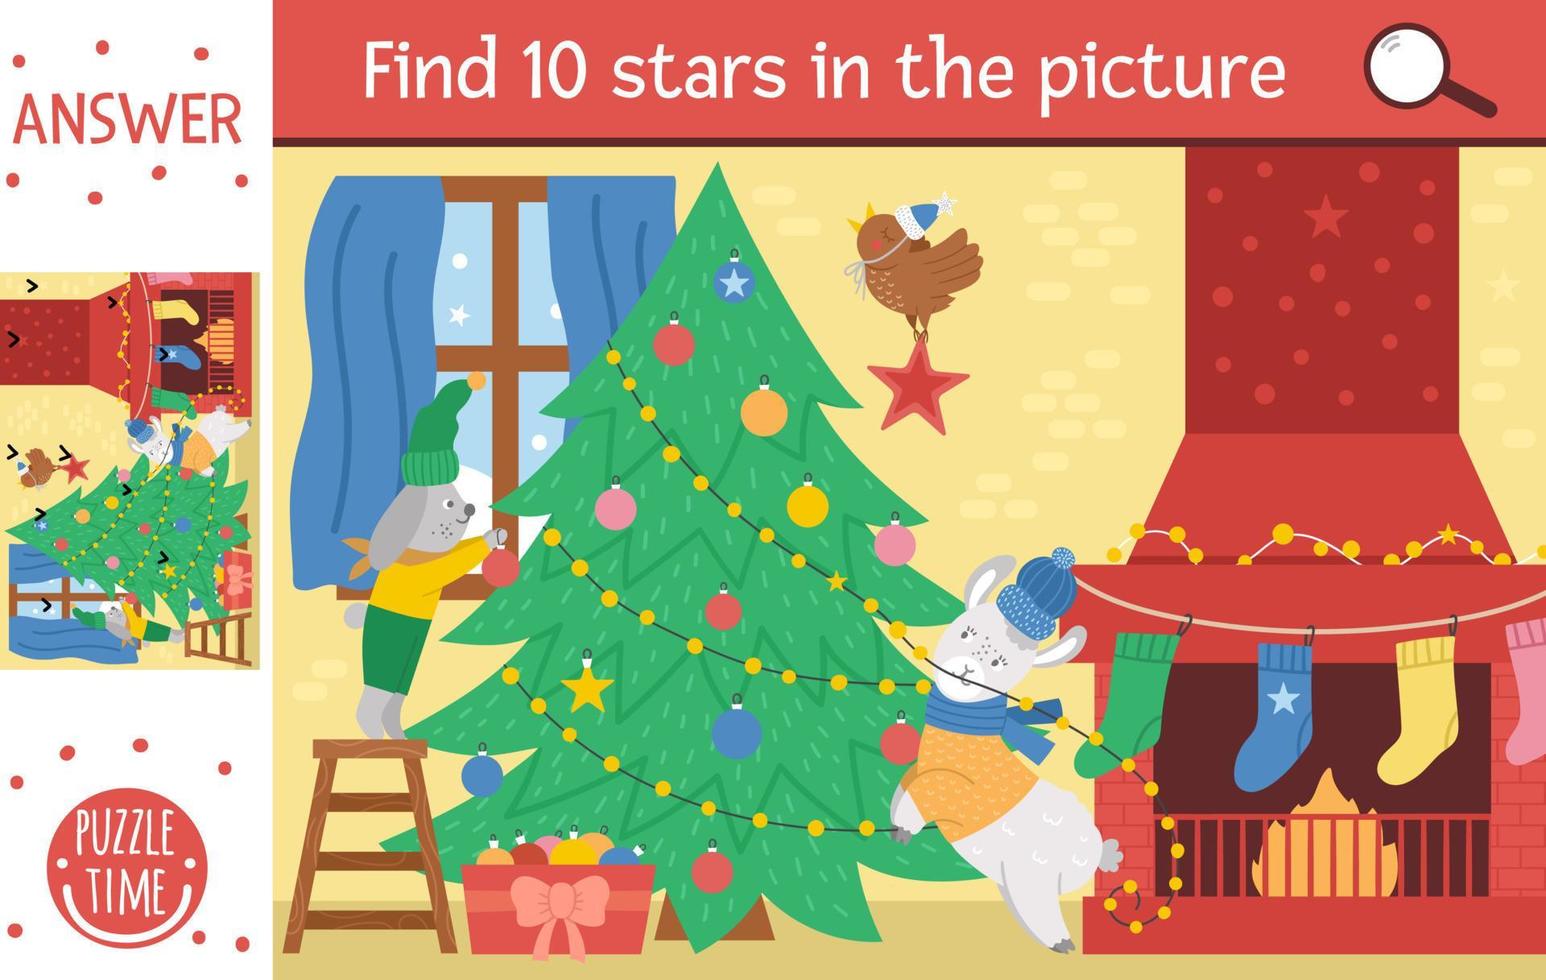 Vector Christmas searching game with cute animals and fir tree. Find hidden stars in the picture. Simple fun educational winter printable activity for kids.